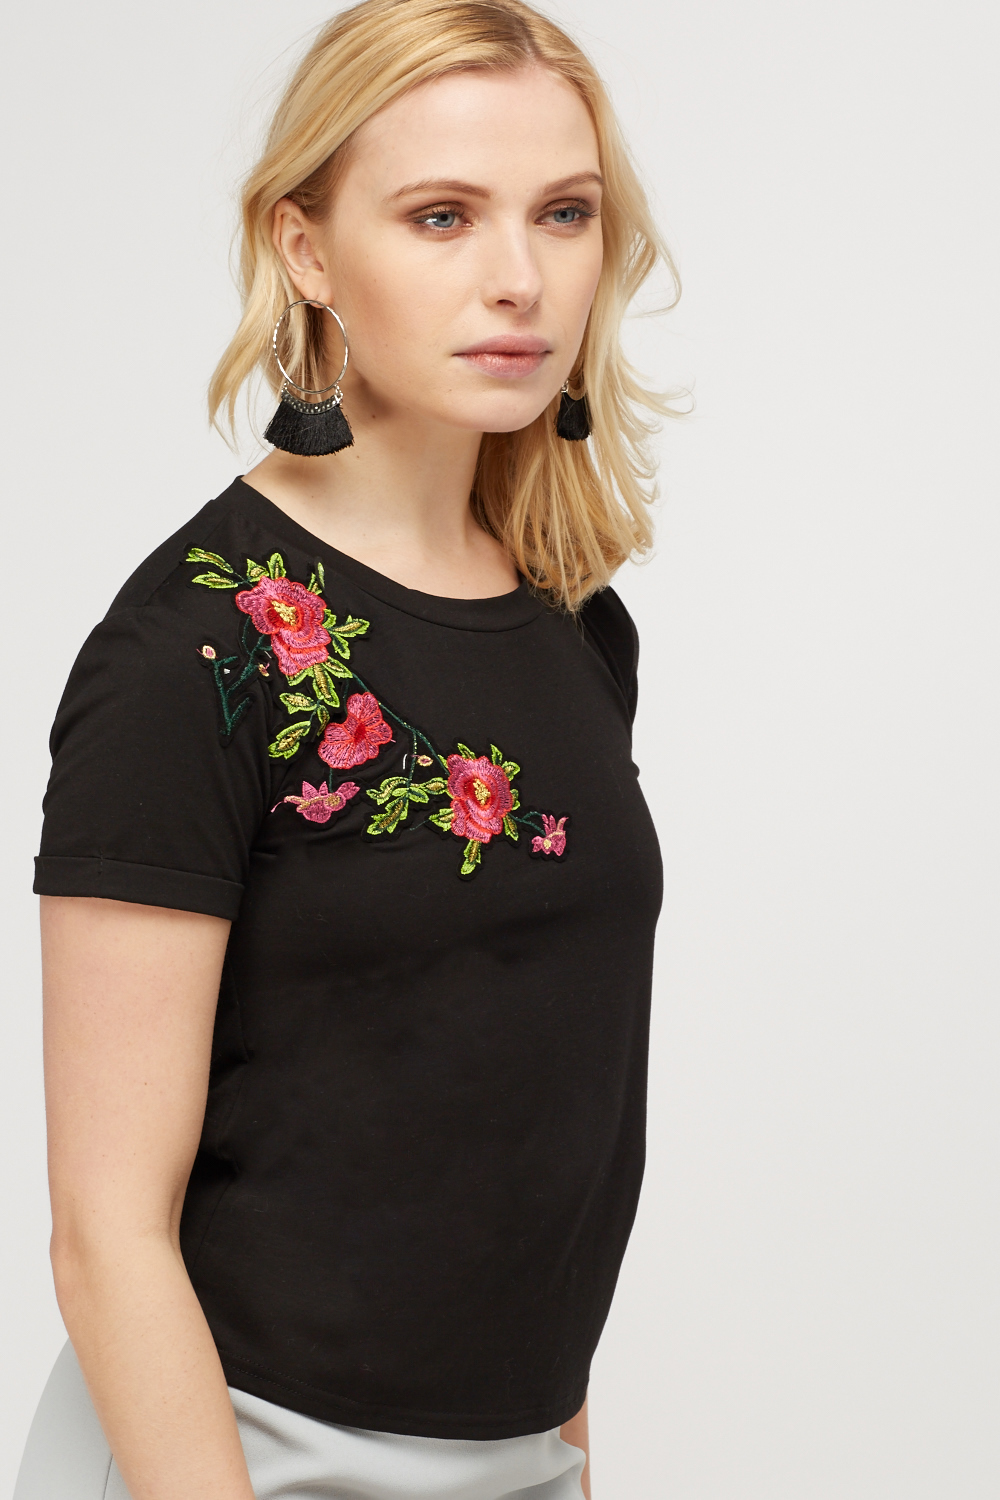 Embroidered Rose T-Shirt - Just $6